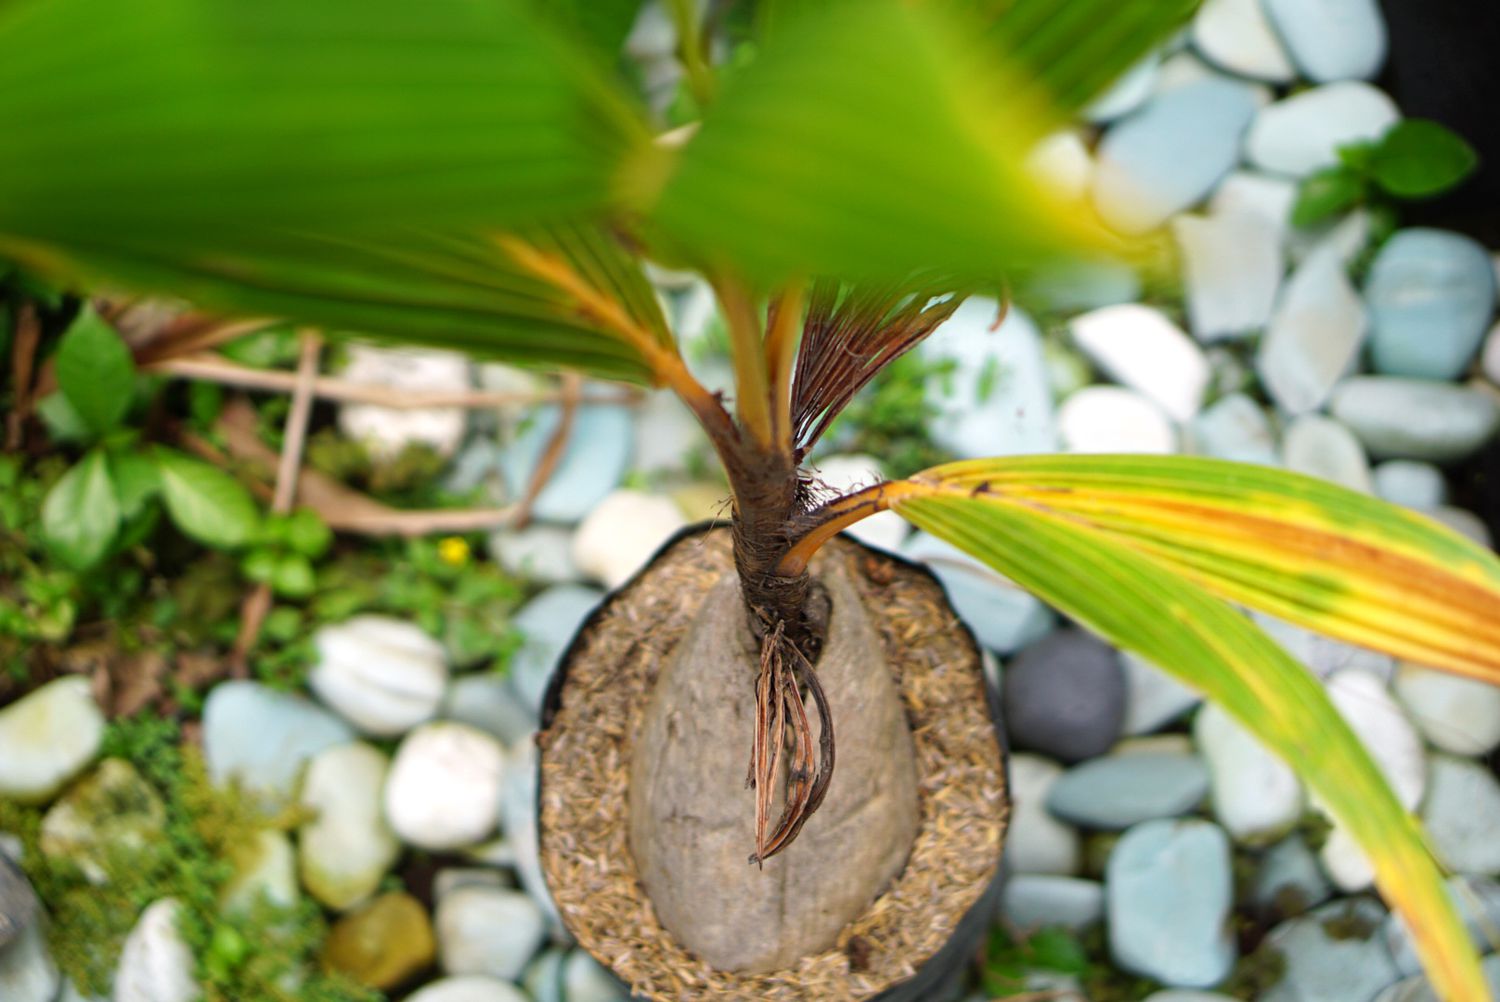 Palm tree sprouting from coconut